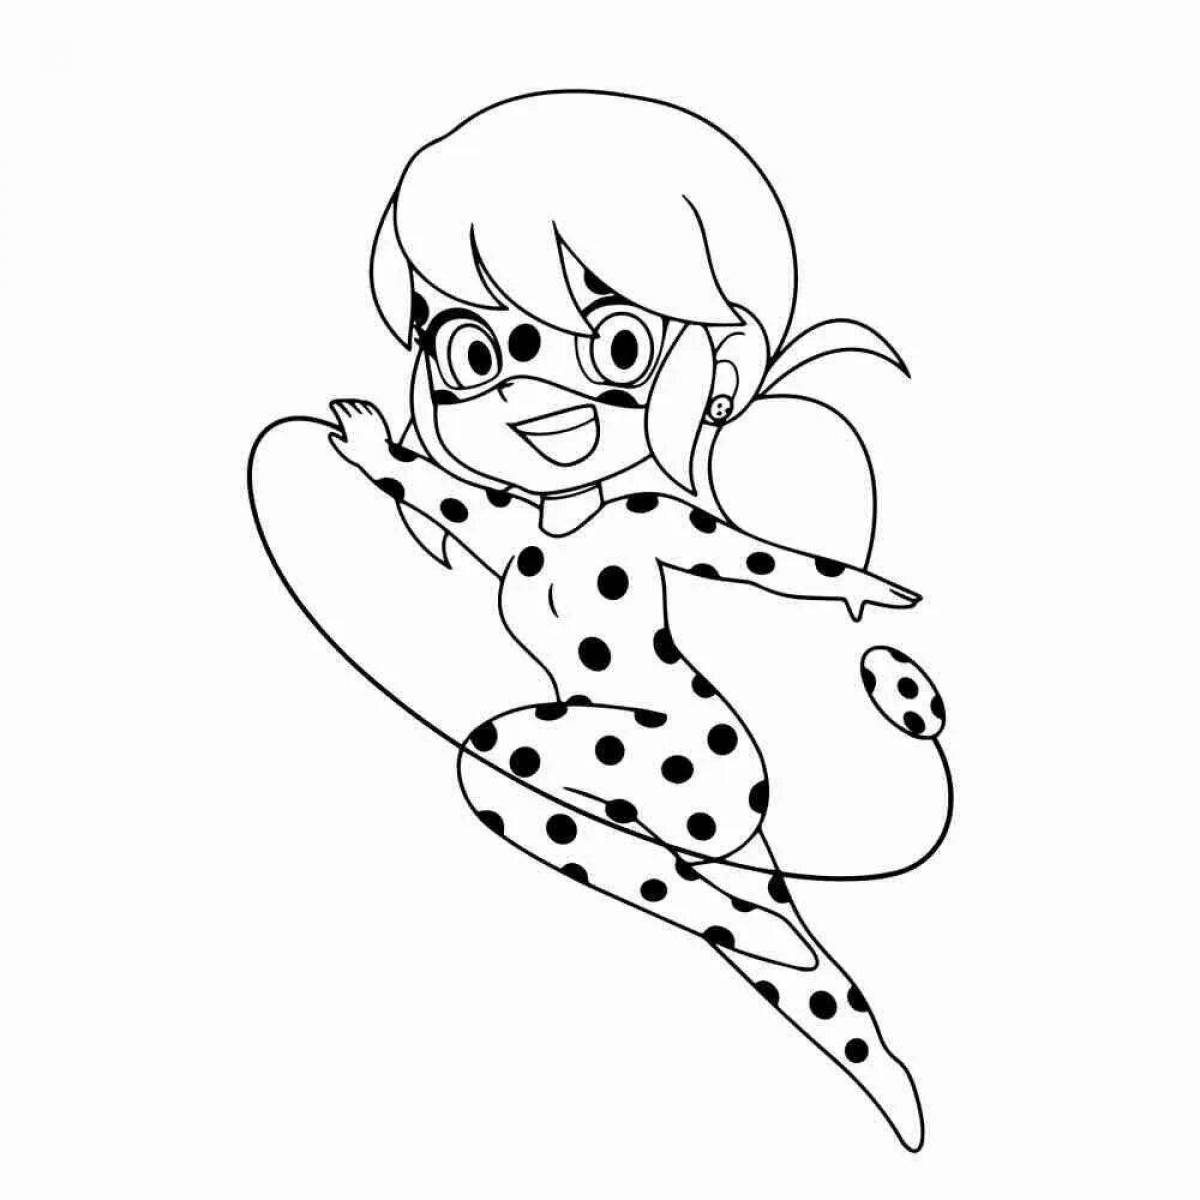 Adorable cat and ladybug coloring page